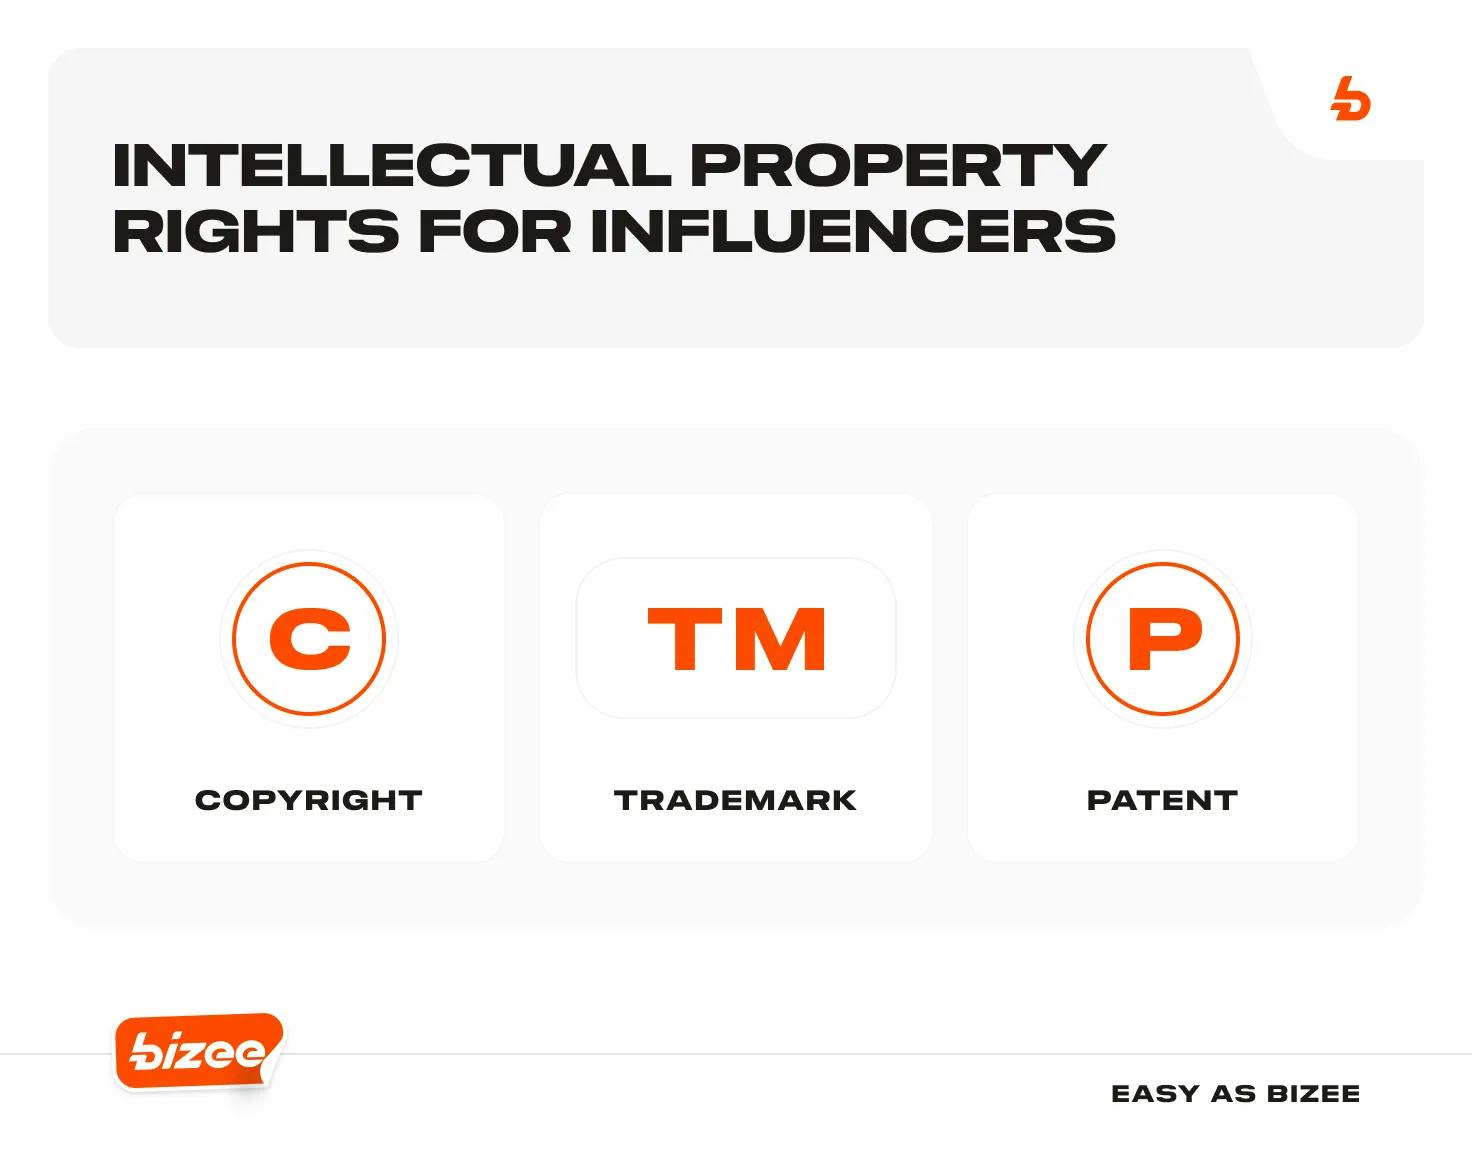 Intellectual Property Rights for Influencers, copyright, trademark, patent